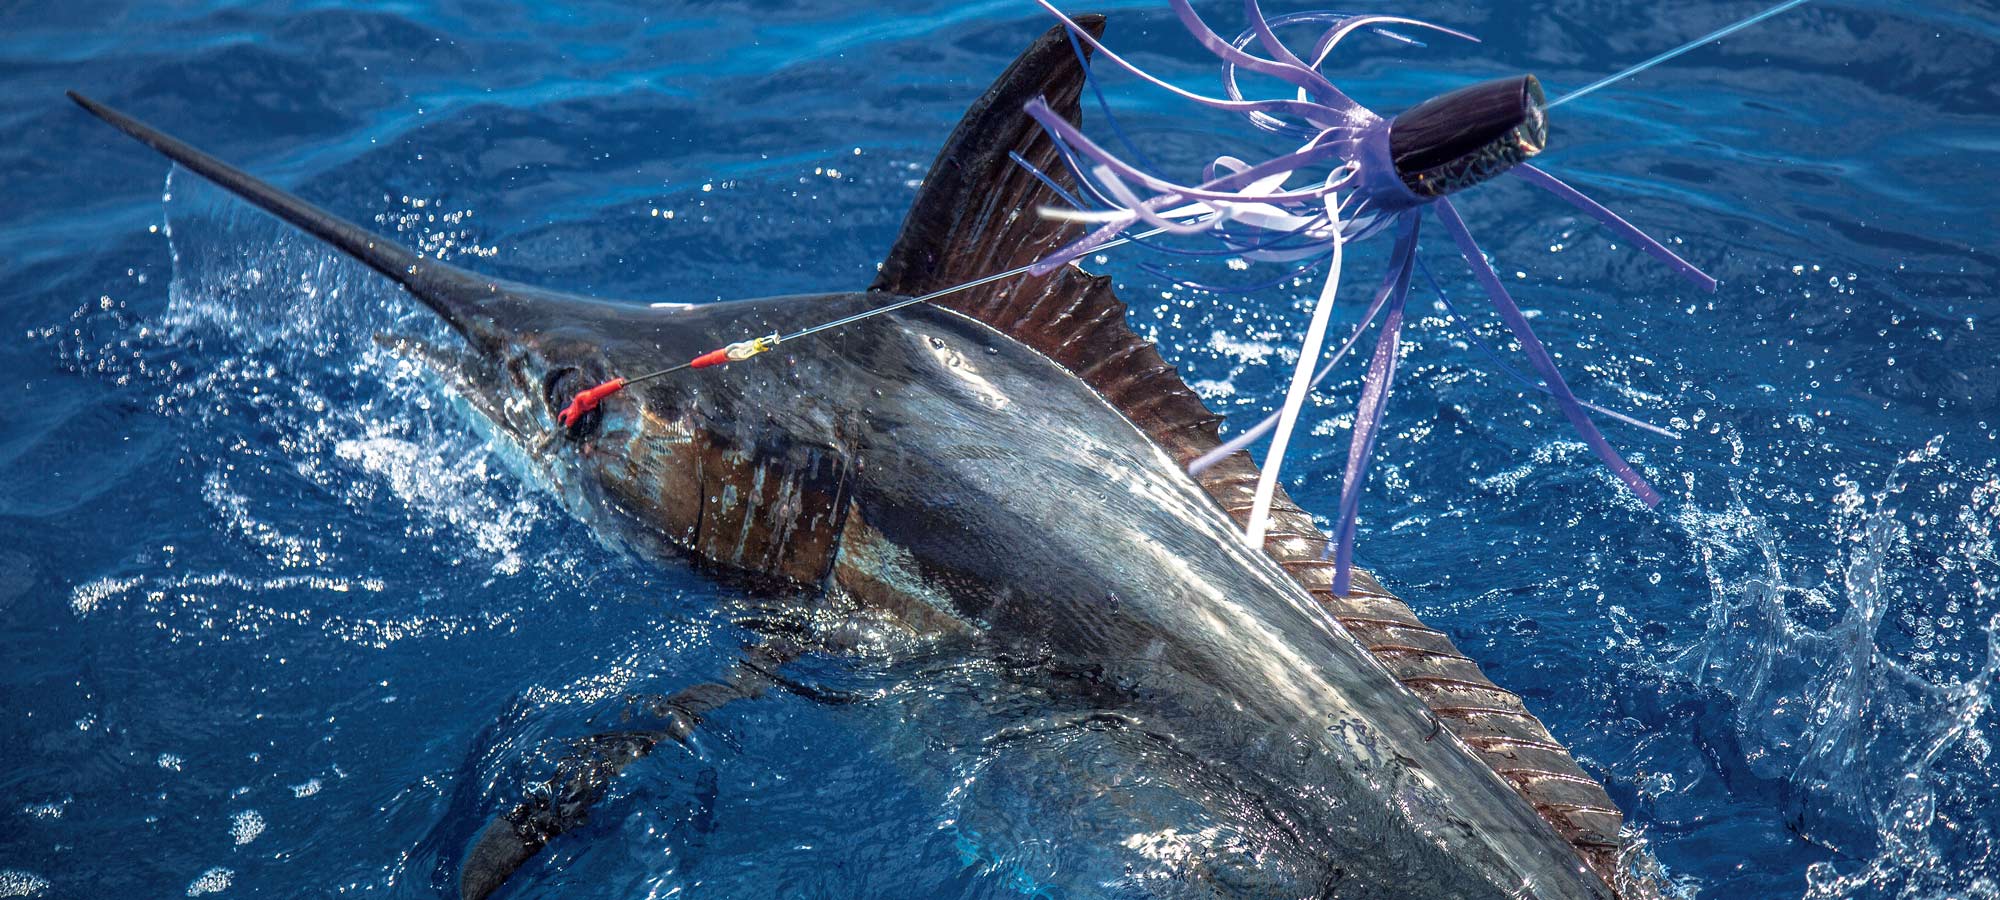 Blue Marlin Fishing Milestone in the South Pacific